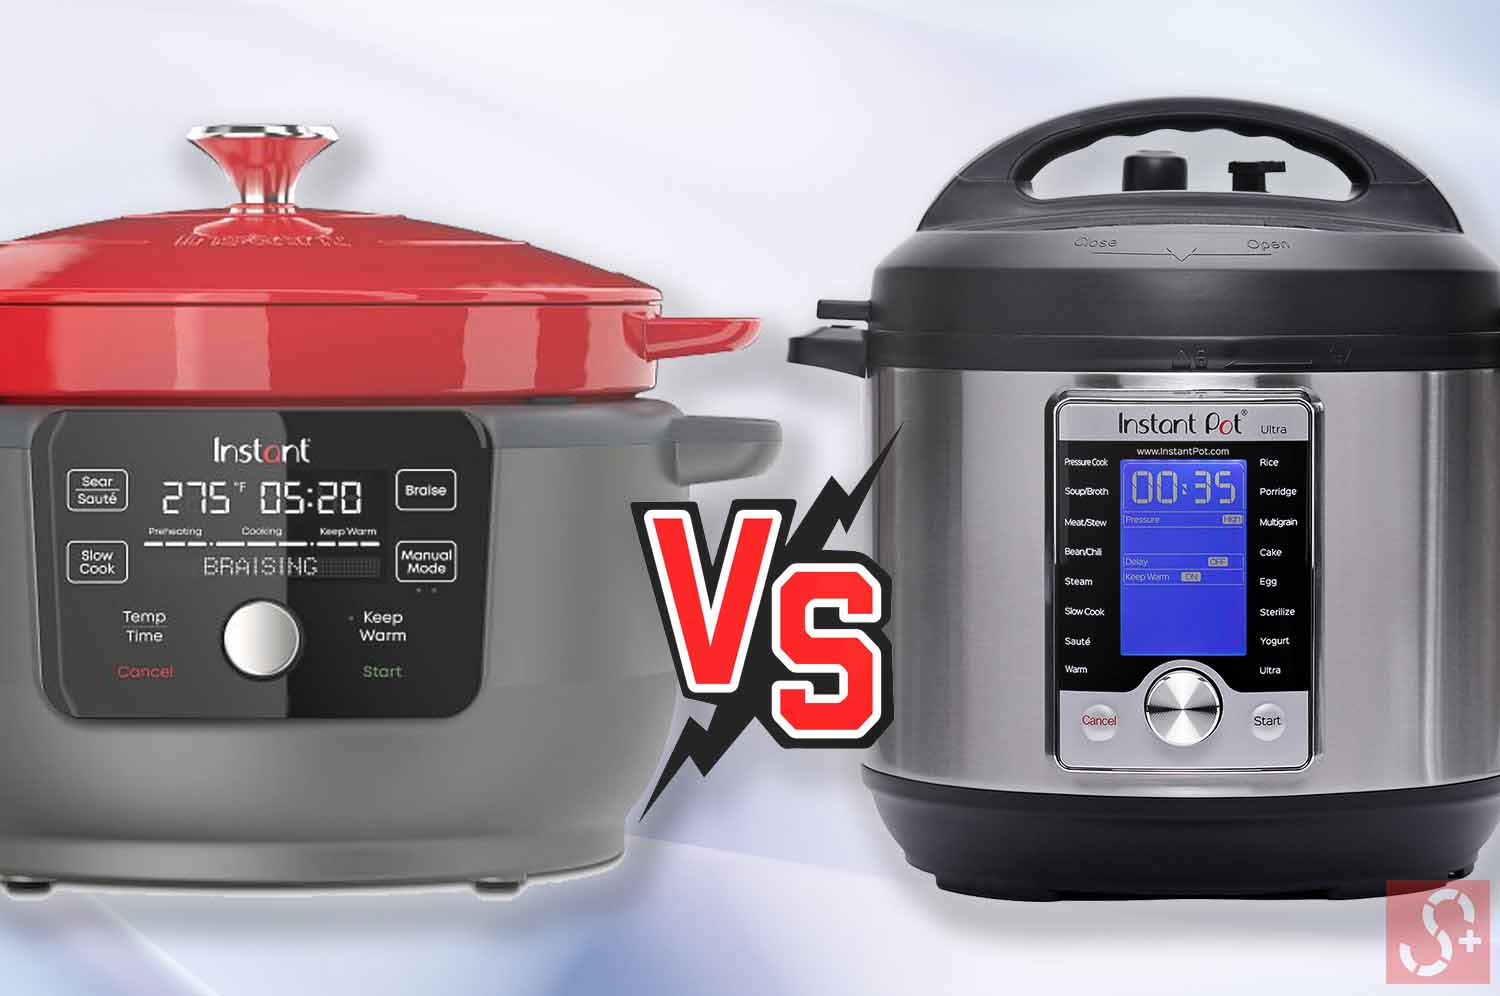 Full Comparison of Instant Dutch Oven and Instant Pot